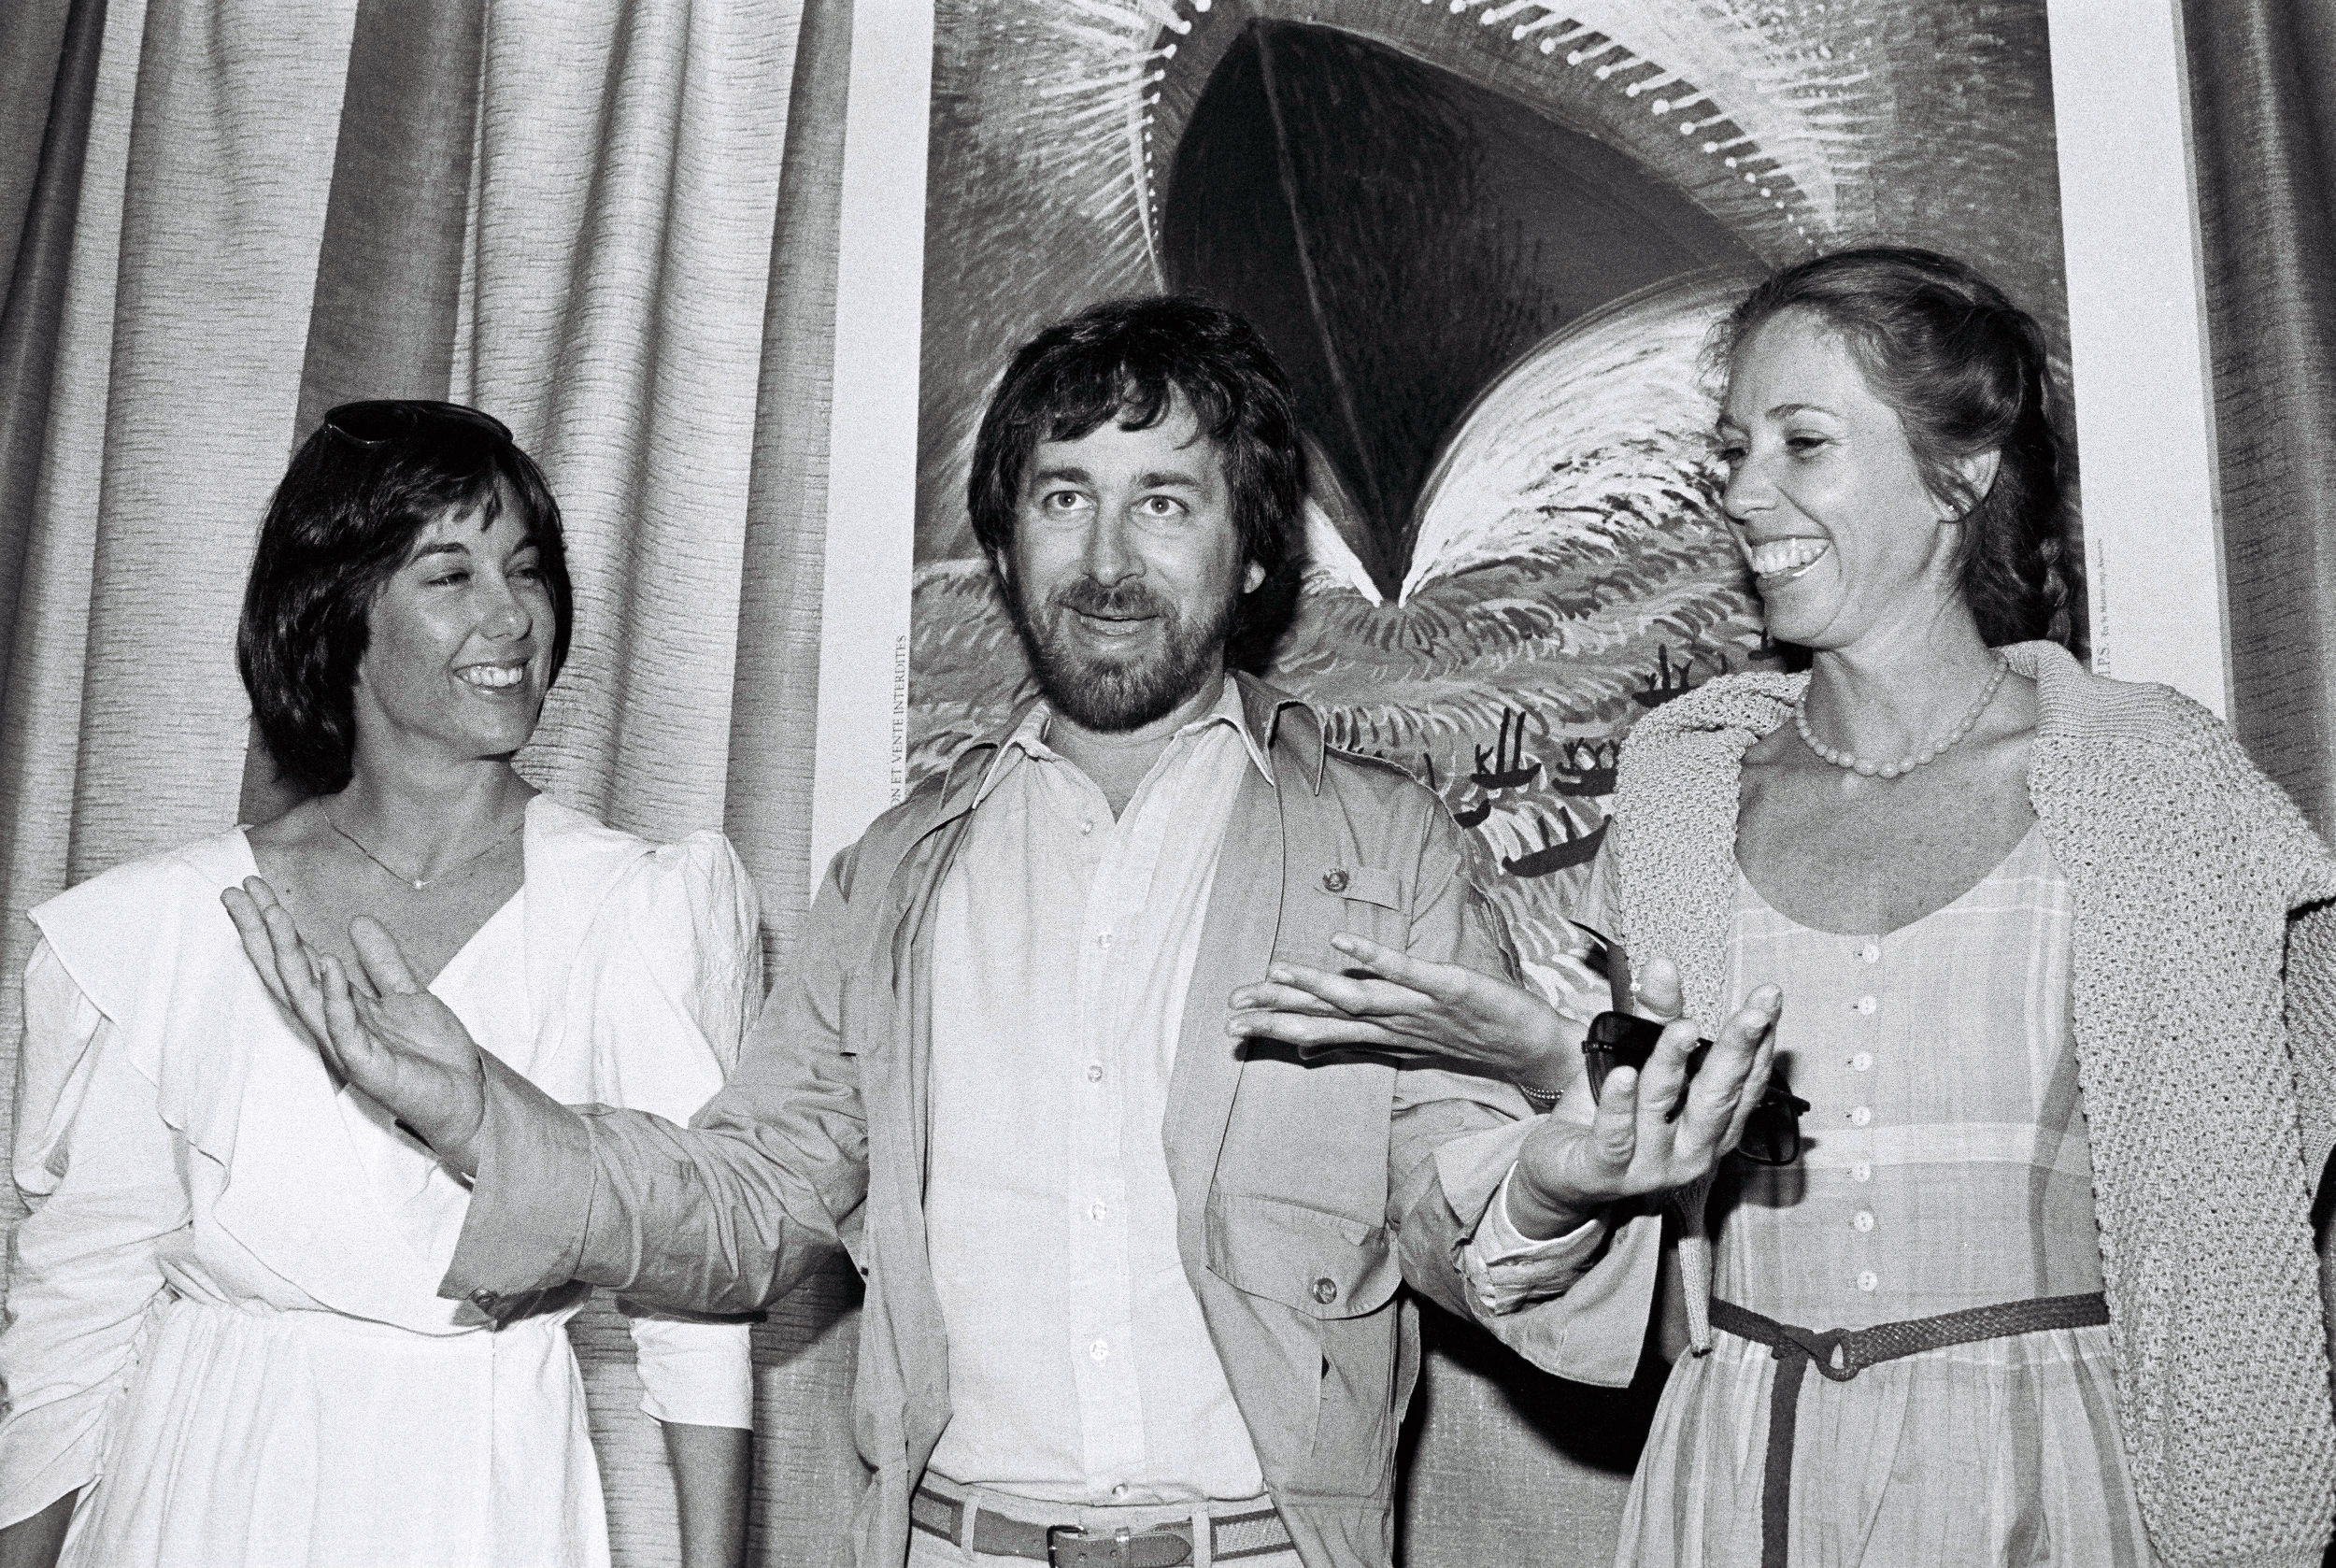 Director Steven Spielberg (C) poses with producer Kathleen Kennedy (L) and screenwriter Melissa Mathison (R) at the 35th Cannes Film Festival, during a photocall for his film 'E.T. the Extra-Terrestrial' in 1982. (Ralph Gatti—AFP/Getty Images)